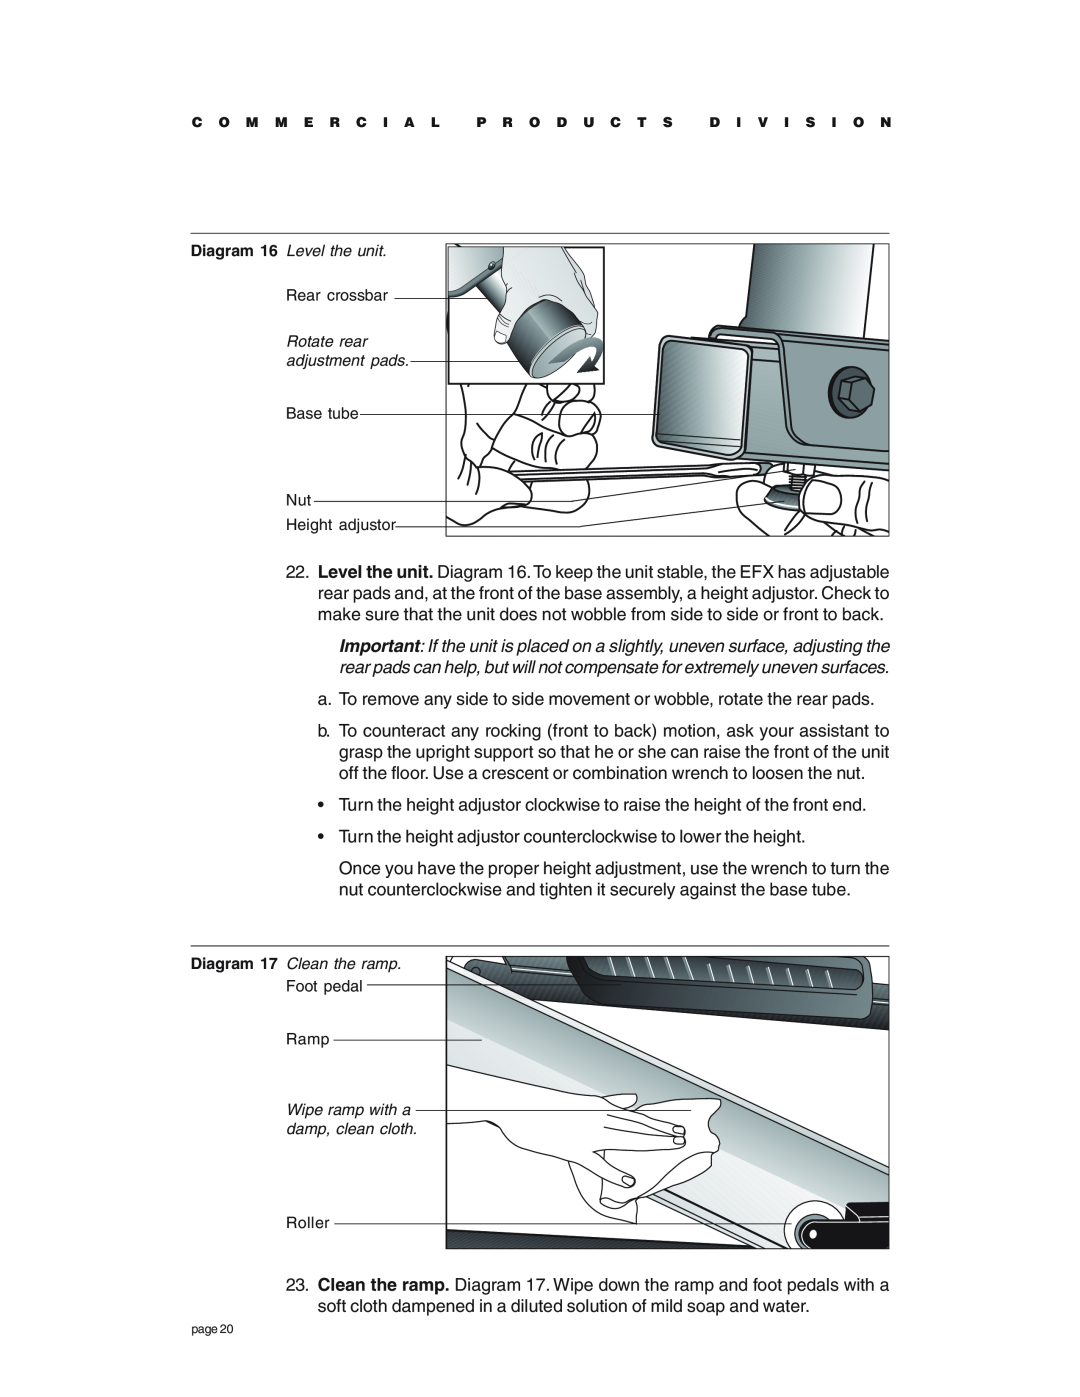 Precor EFX534 owner manual a. To remove any side to side movement or wobble, rotate the rear pads 